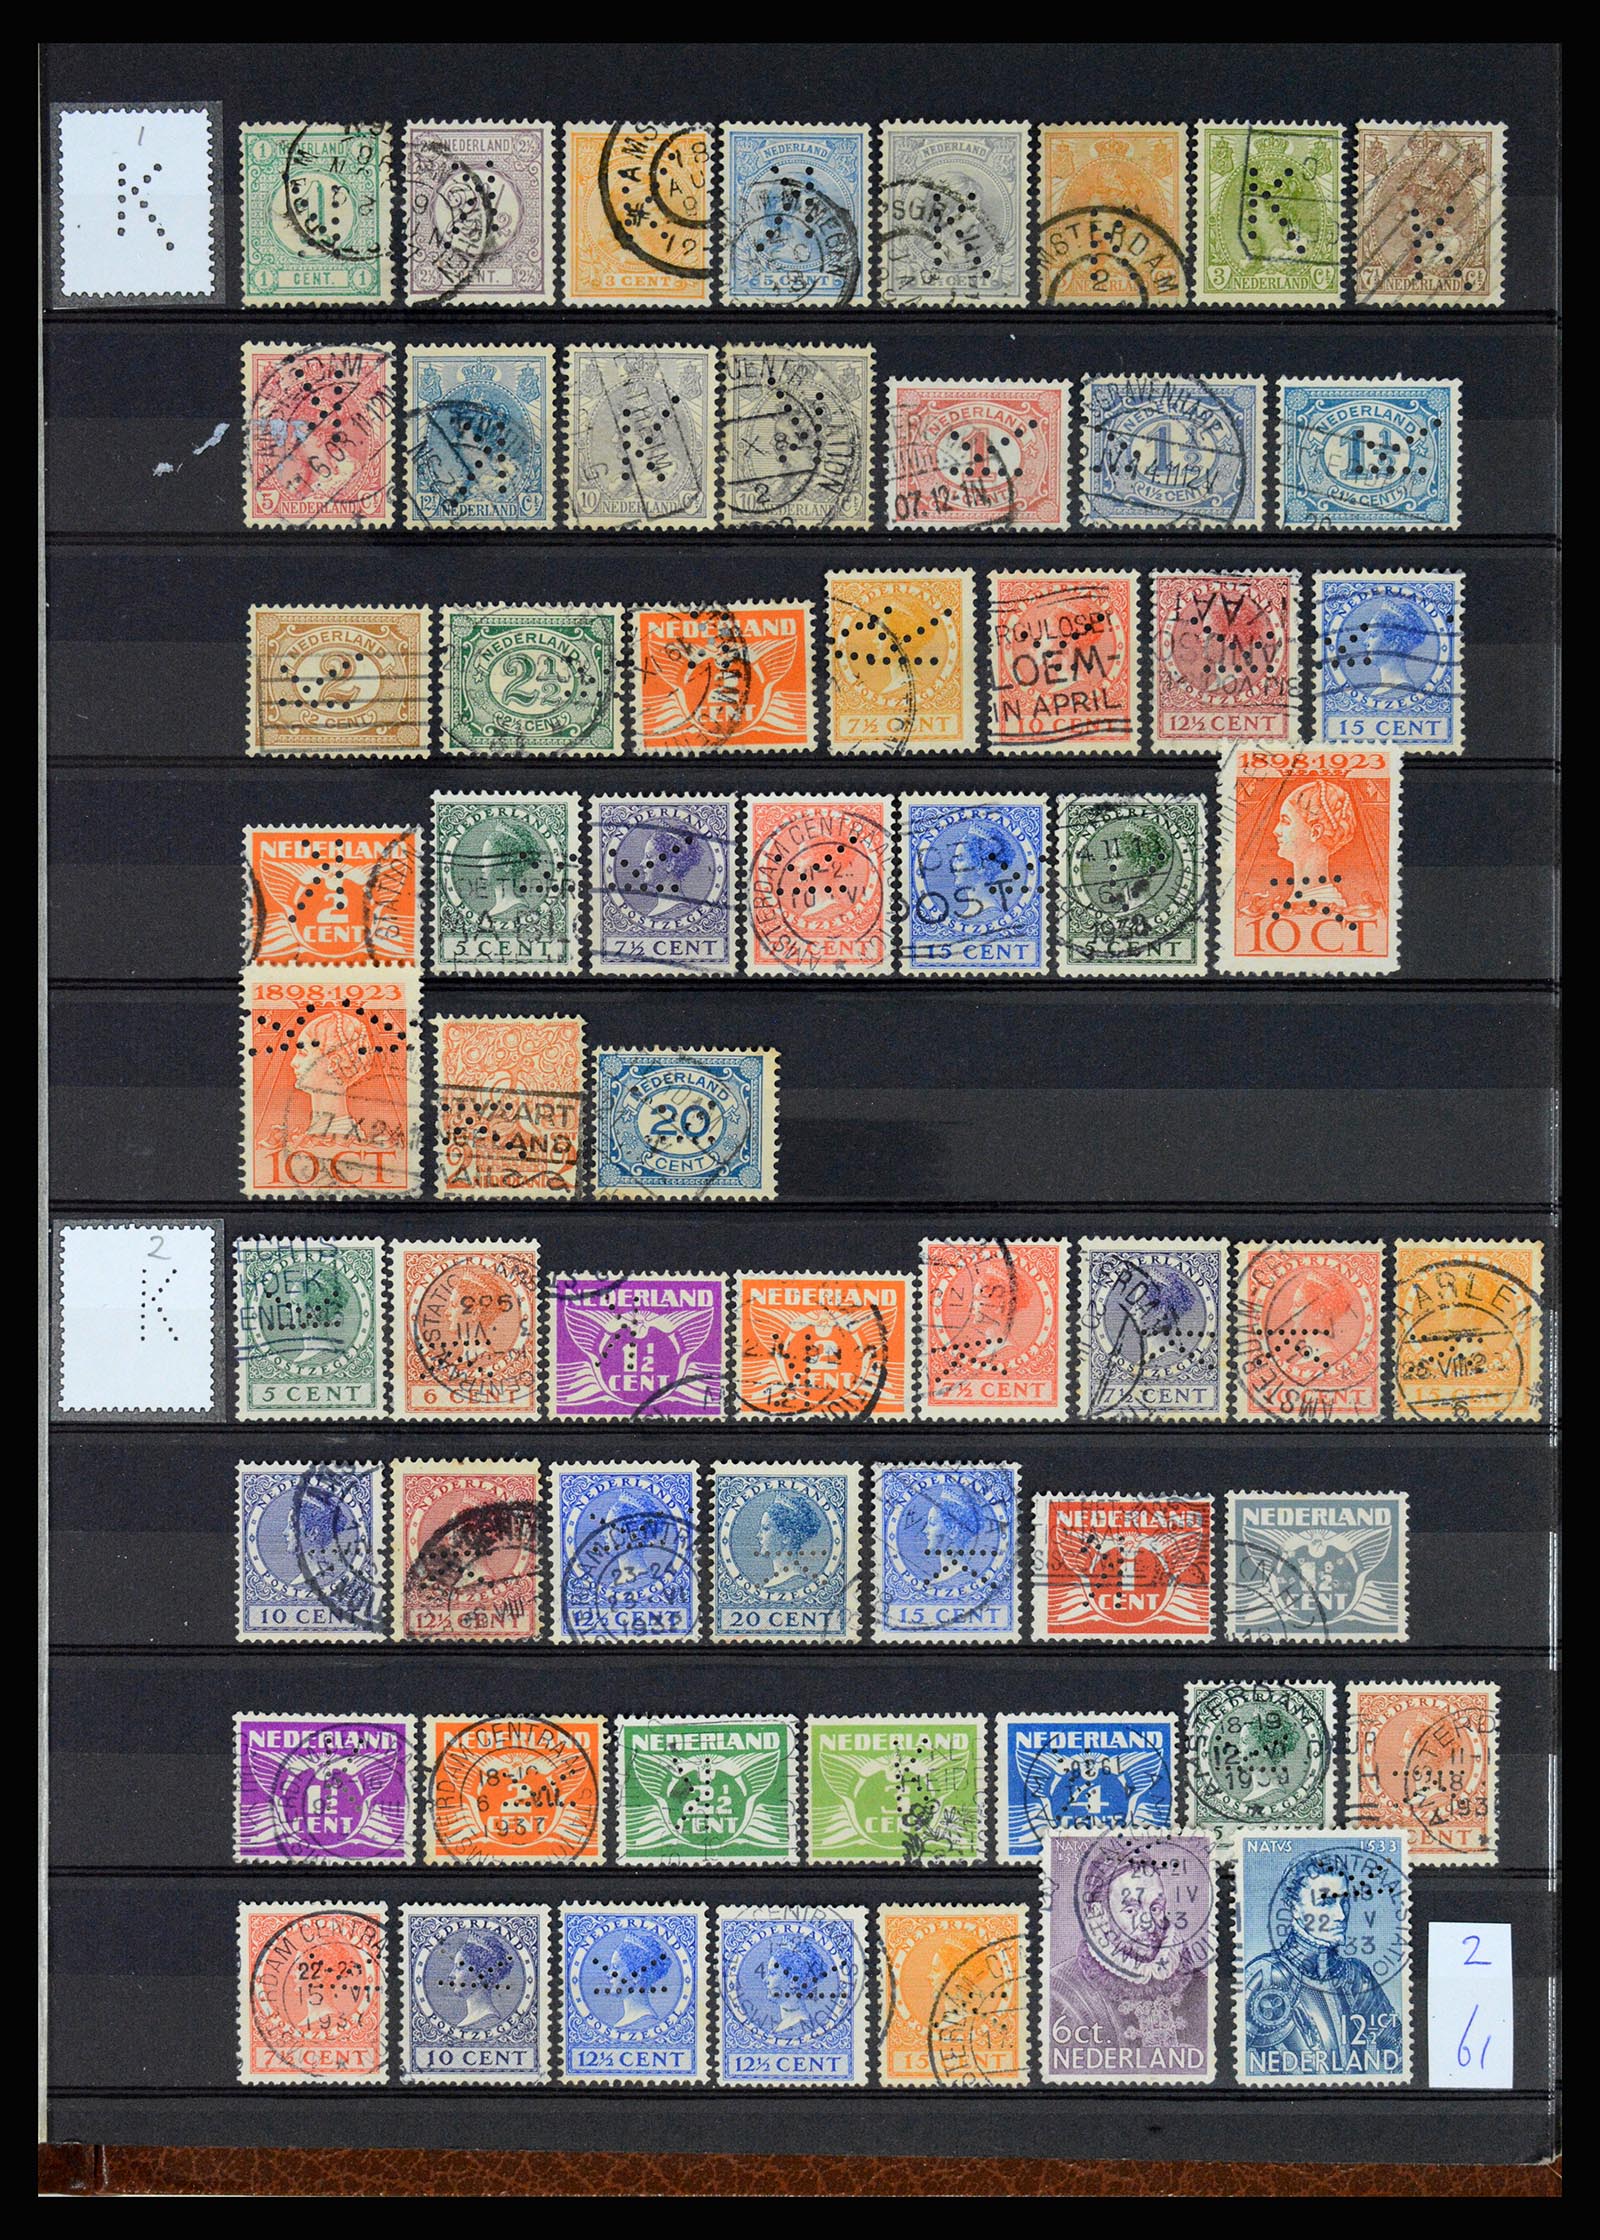 37183 024 - Stamp collection 37183 Netherlands perfins 1872-1960.